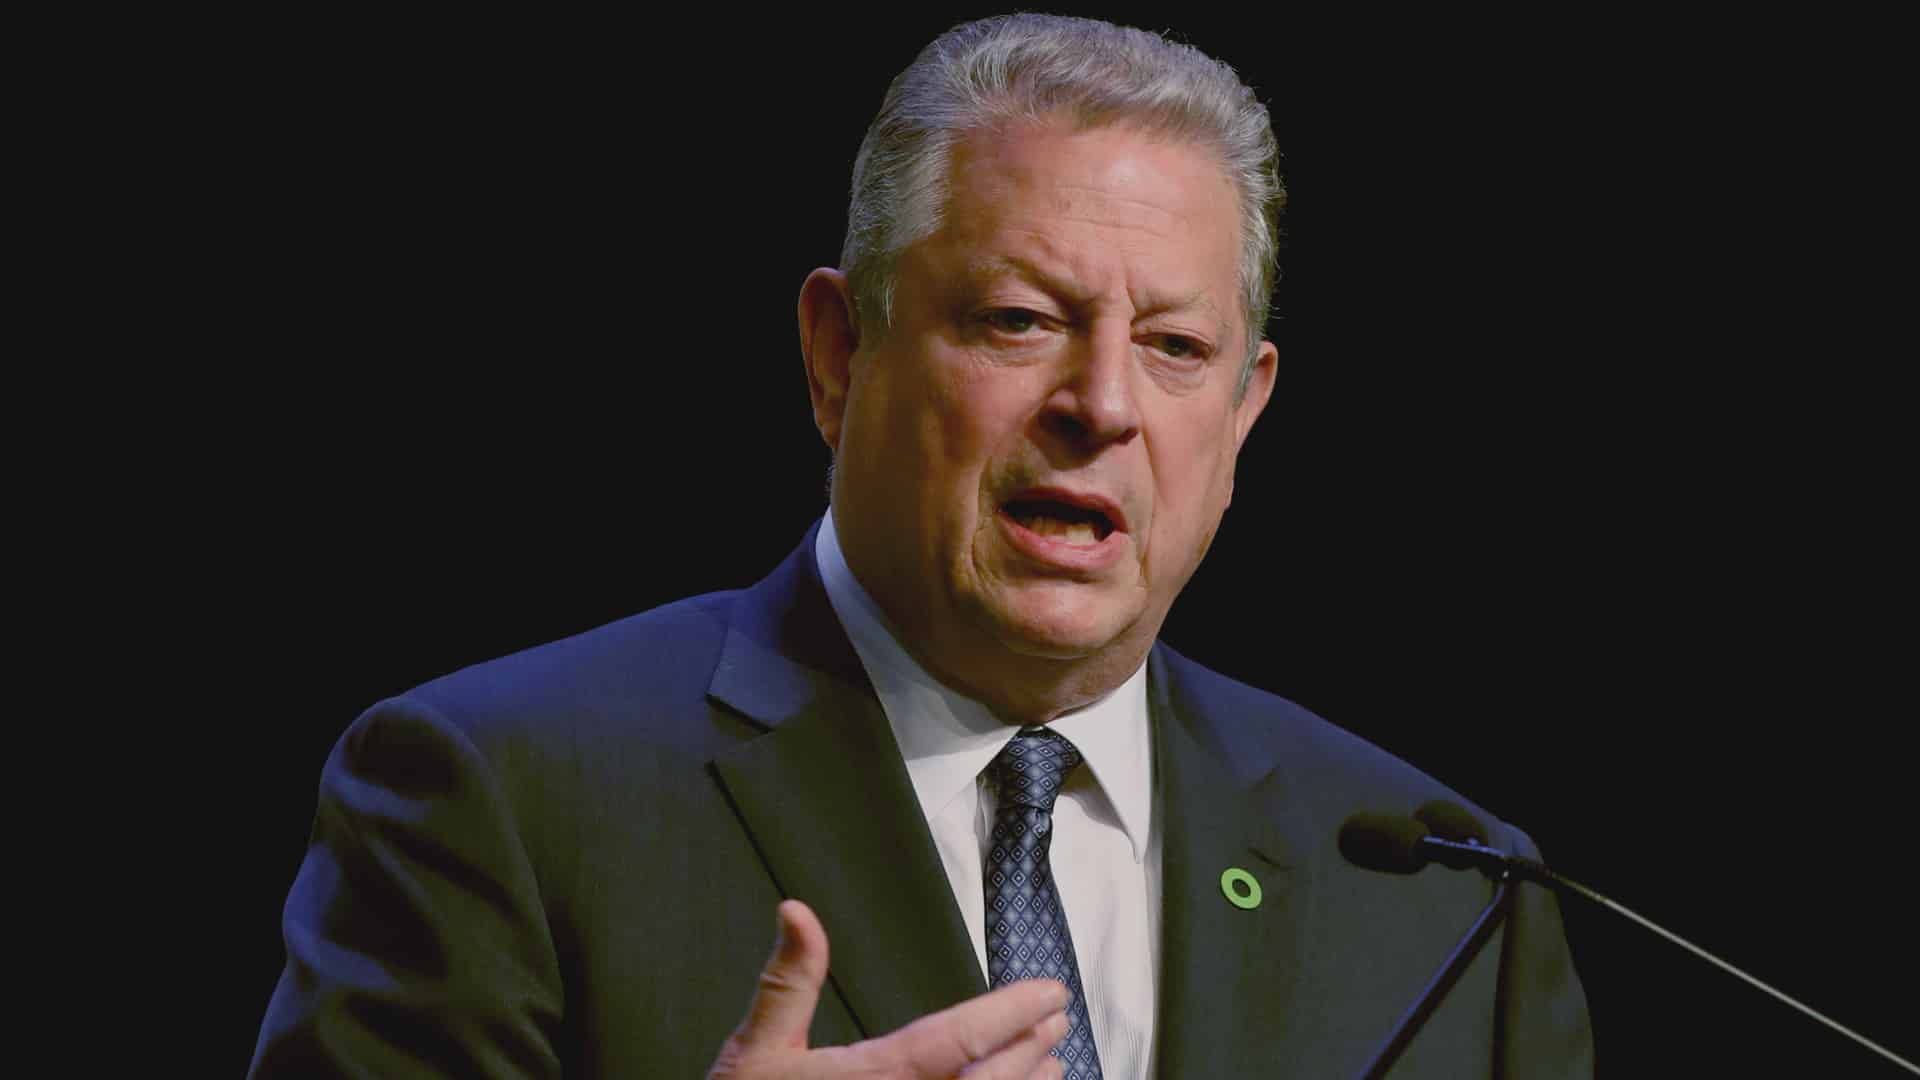 Regenerative agriculture present opportunity to reduce emissions: Al Gore